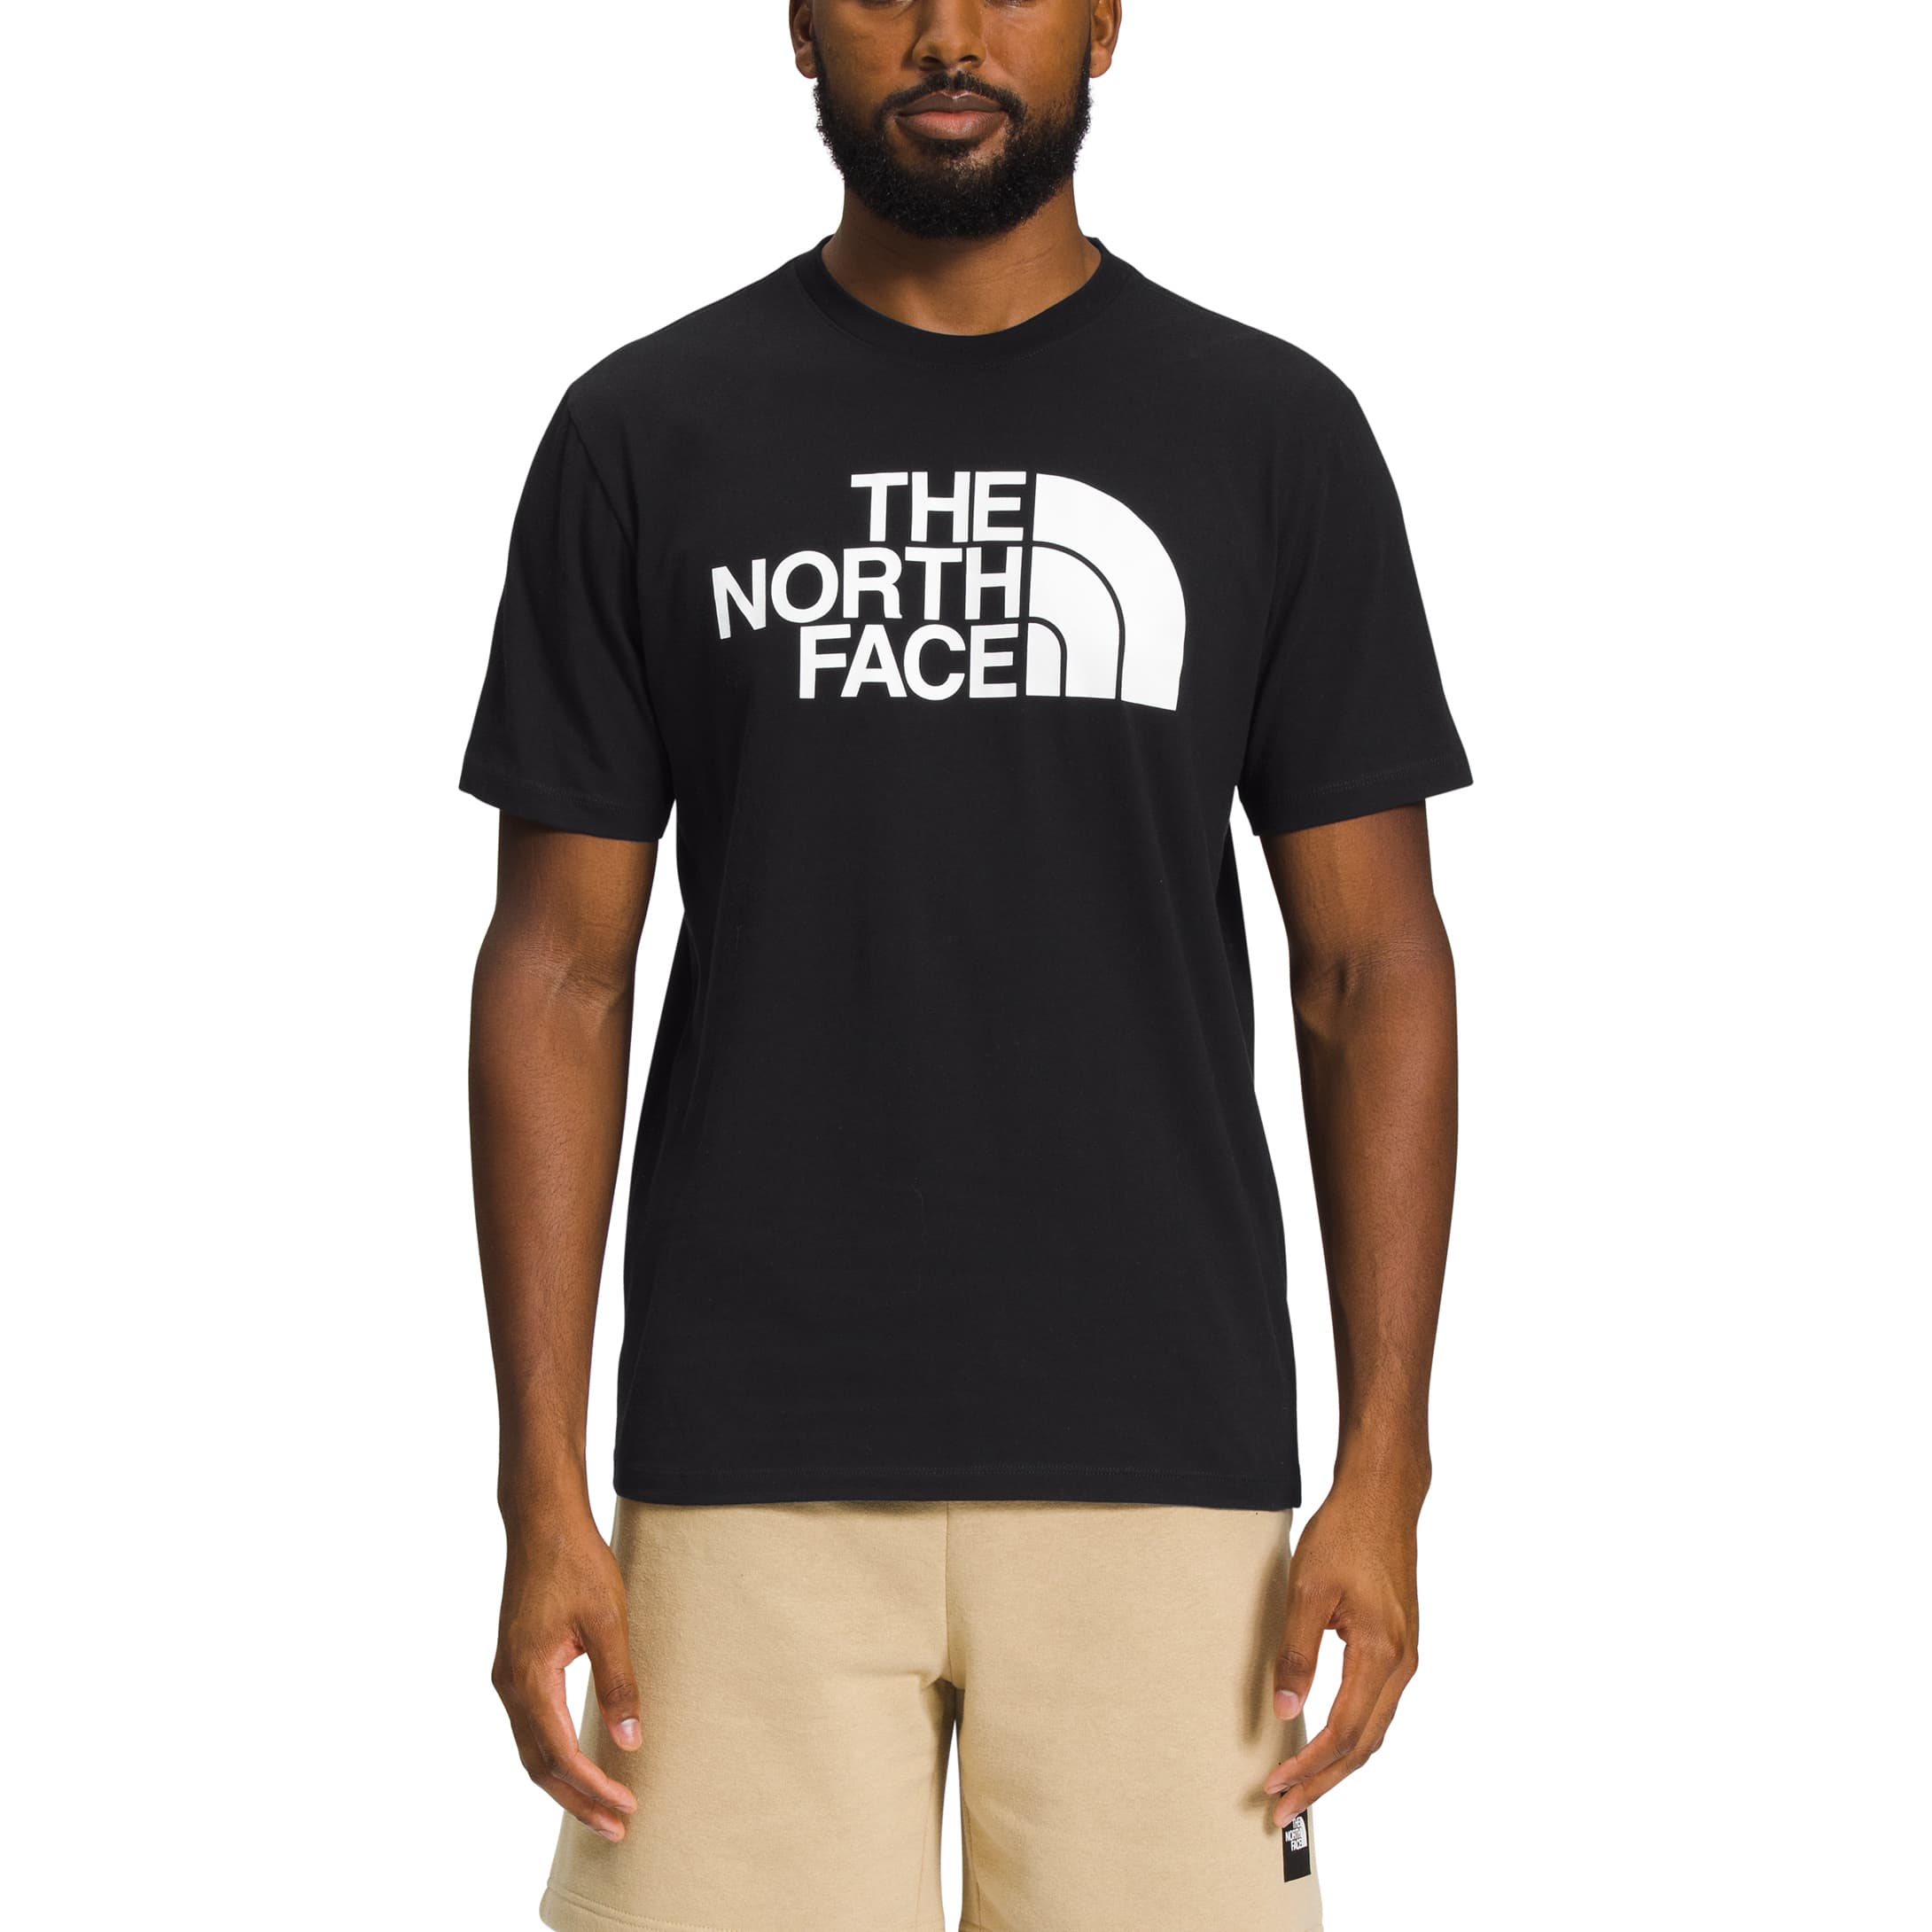 The North Face Half Dome Short Sleeve Shirt - Men's